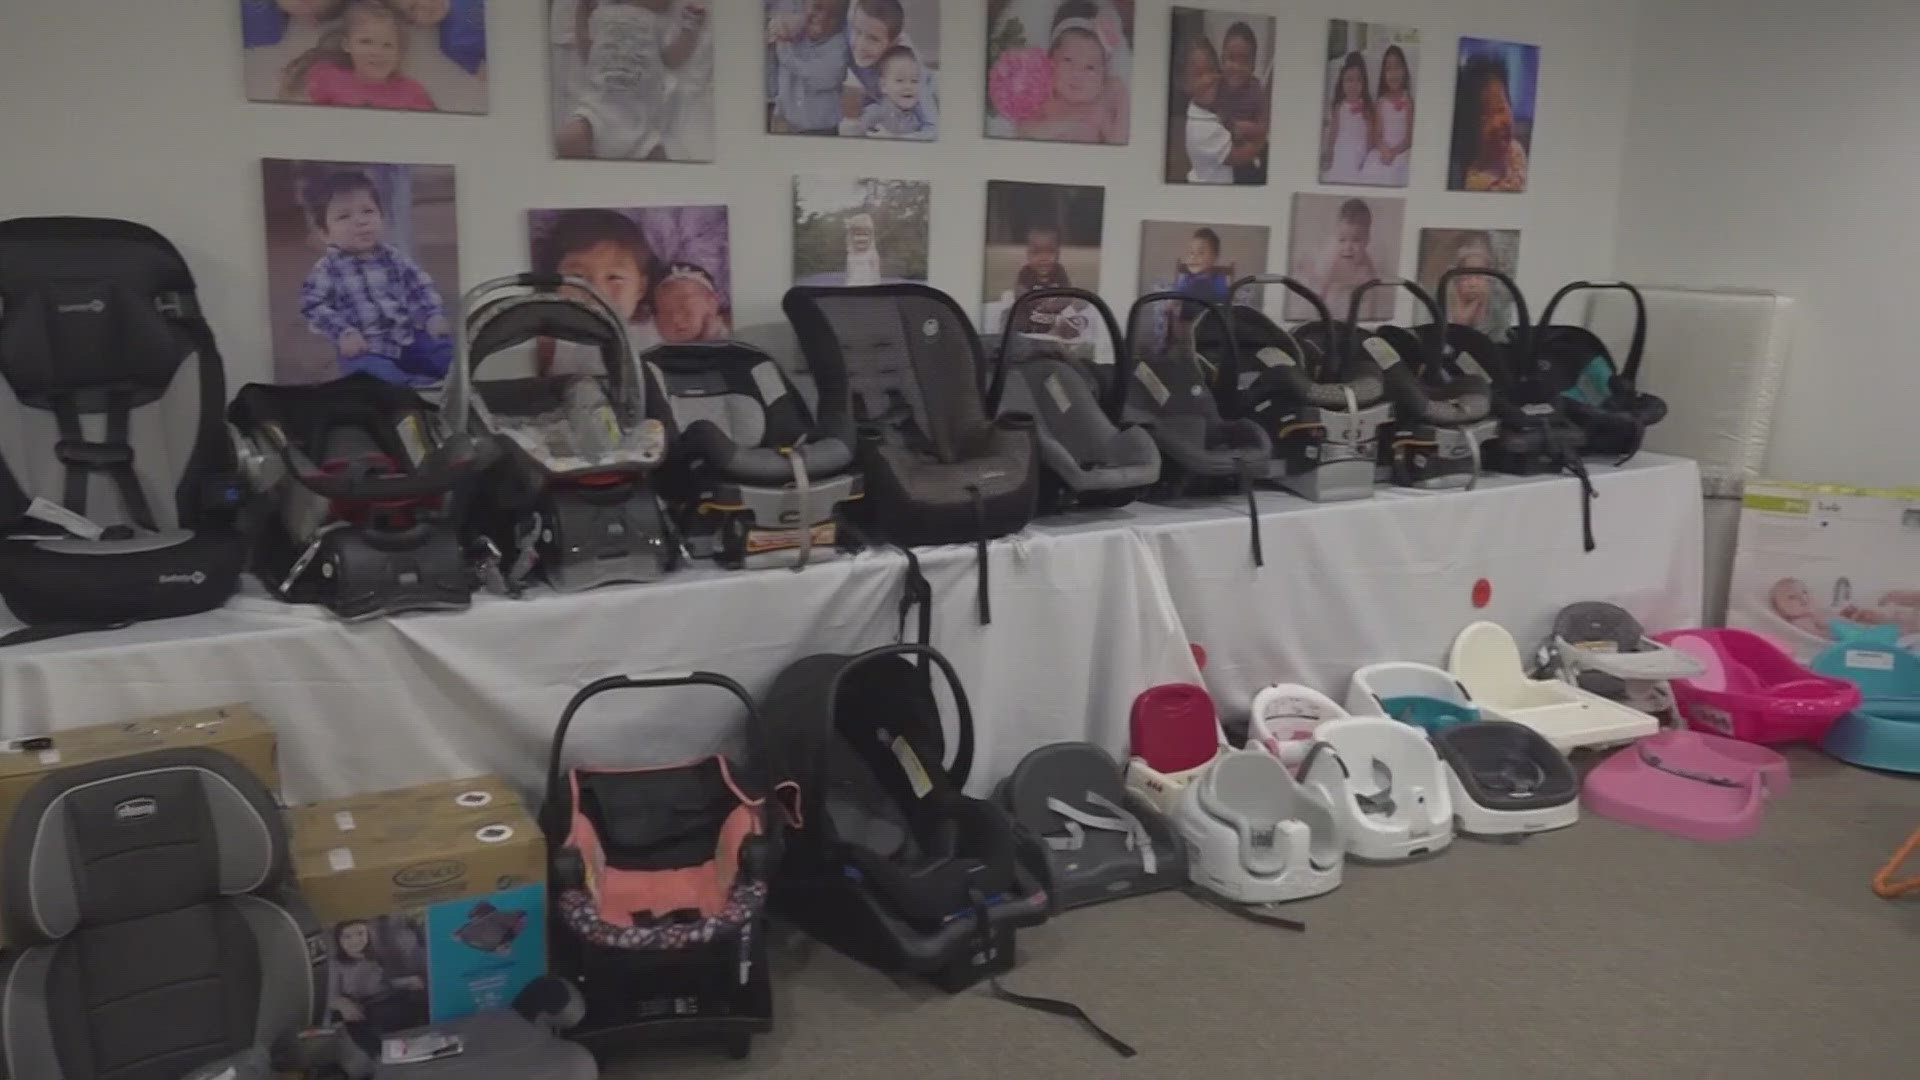 This center is helping young mothers in the Brazos Valley get the education and help they need.